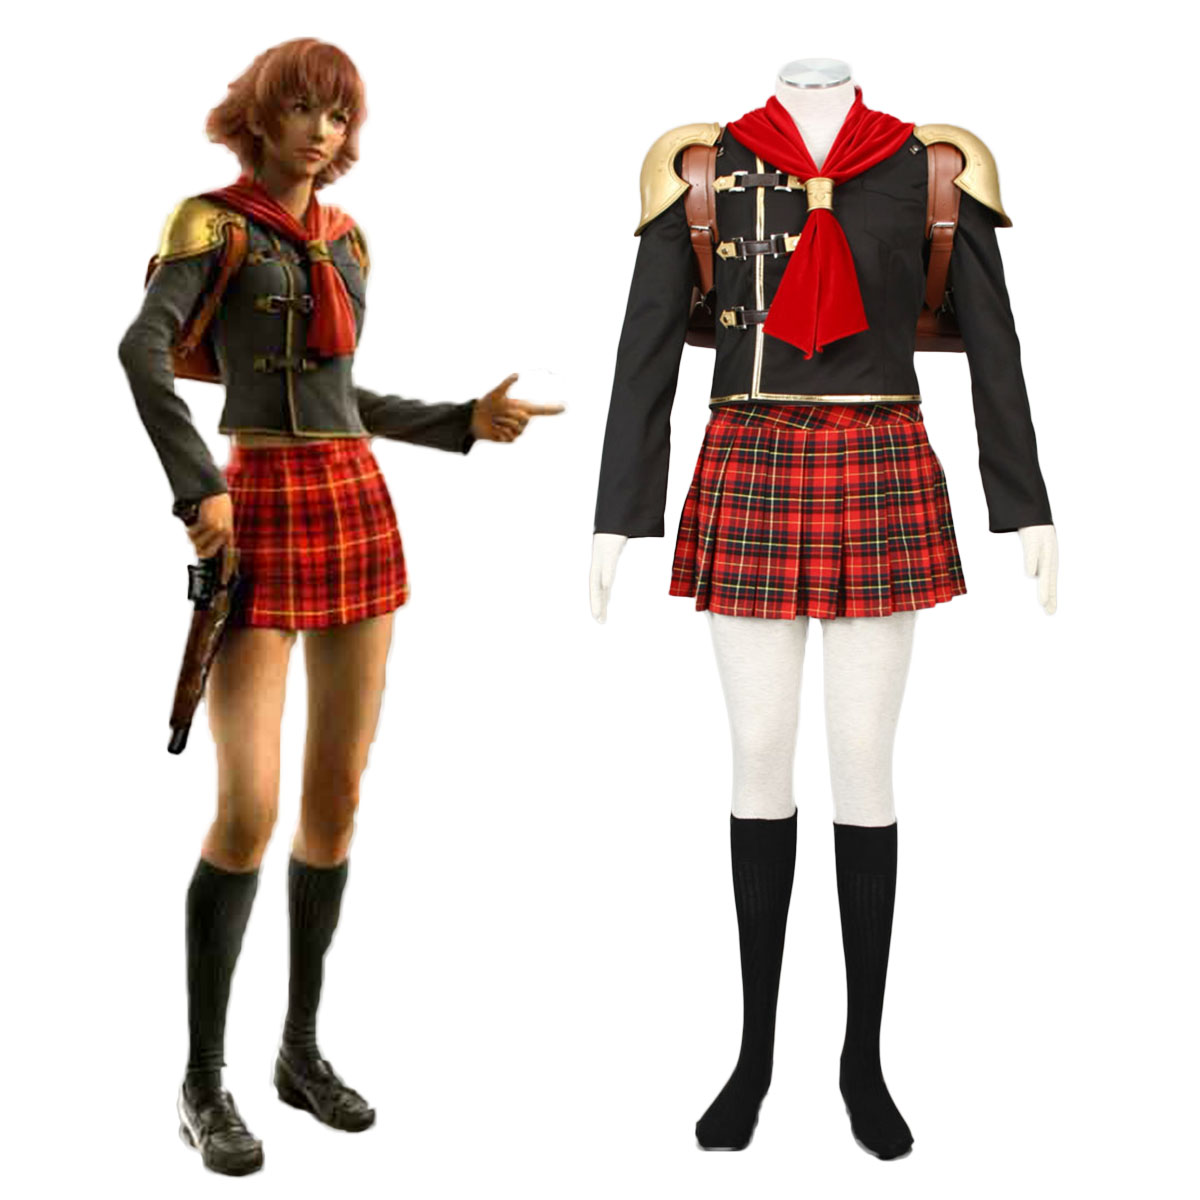 Final Fantasy Type-0 Cater 1 Anime Cosplay Costumes Outfit